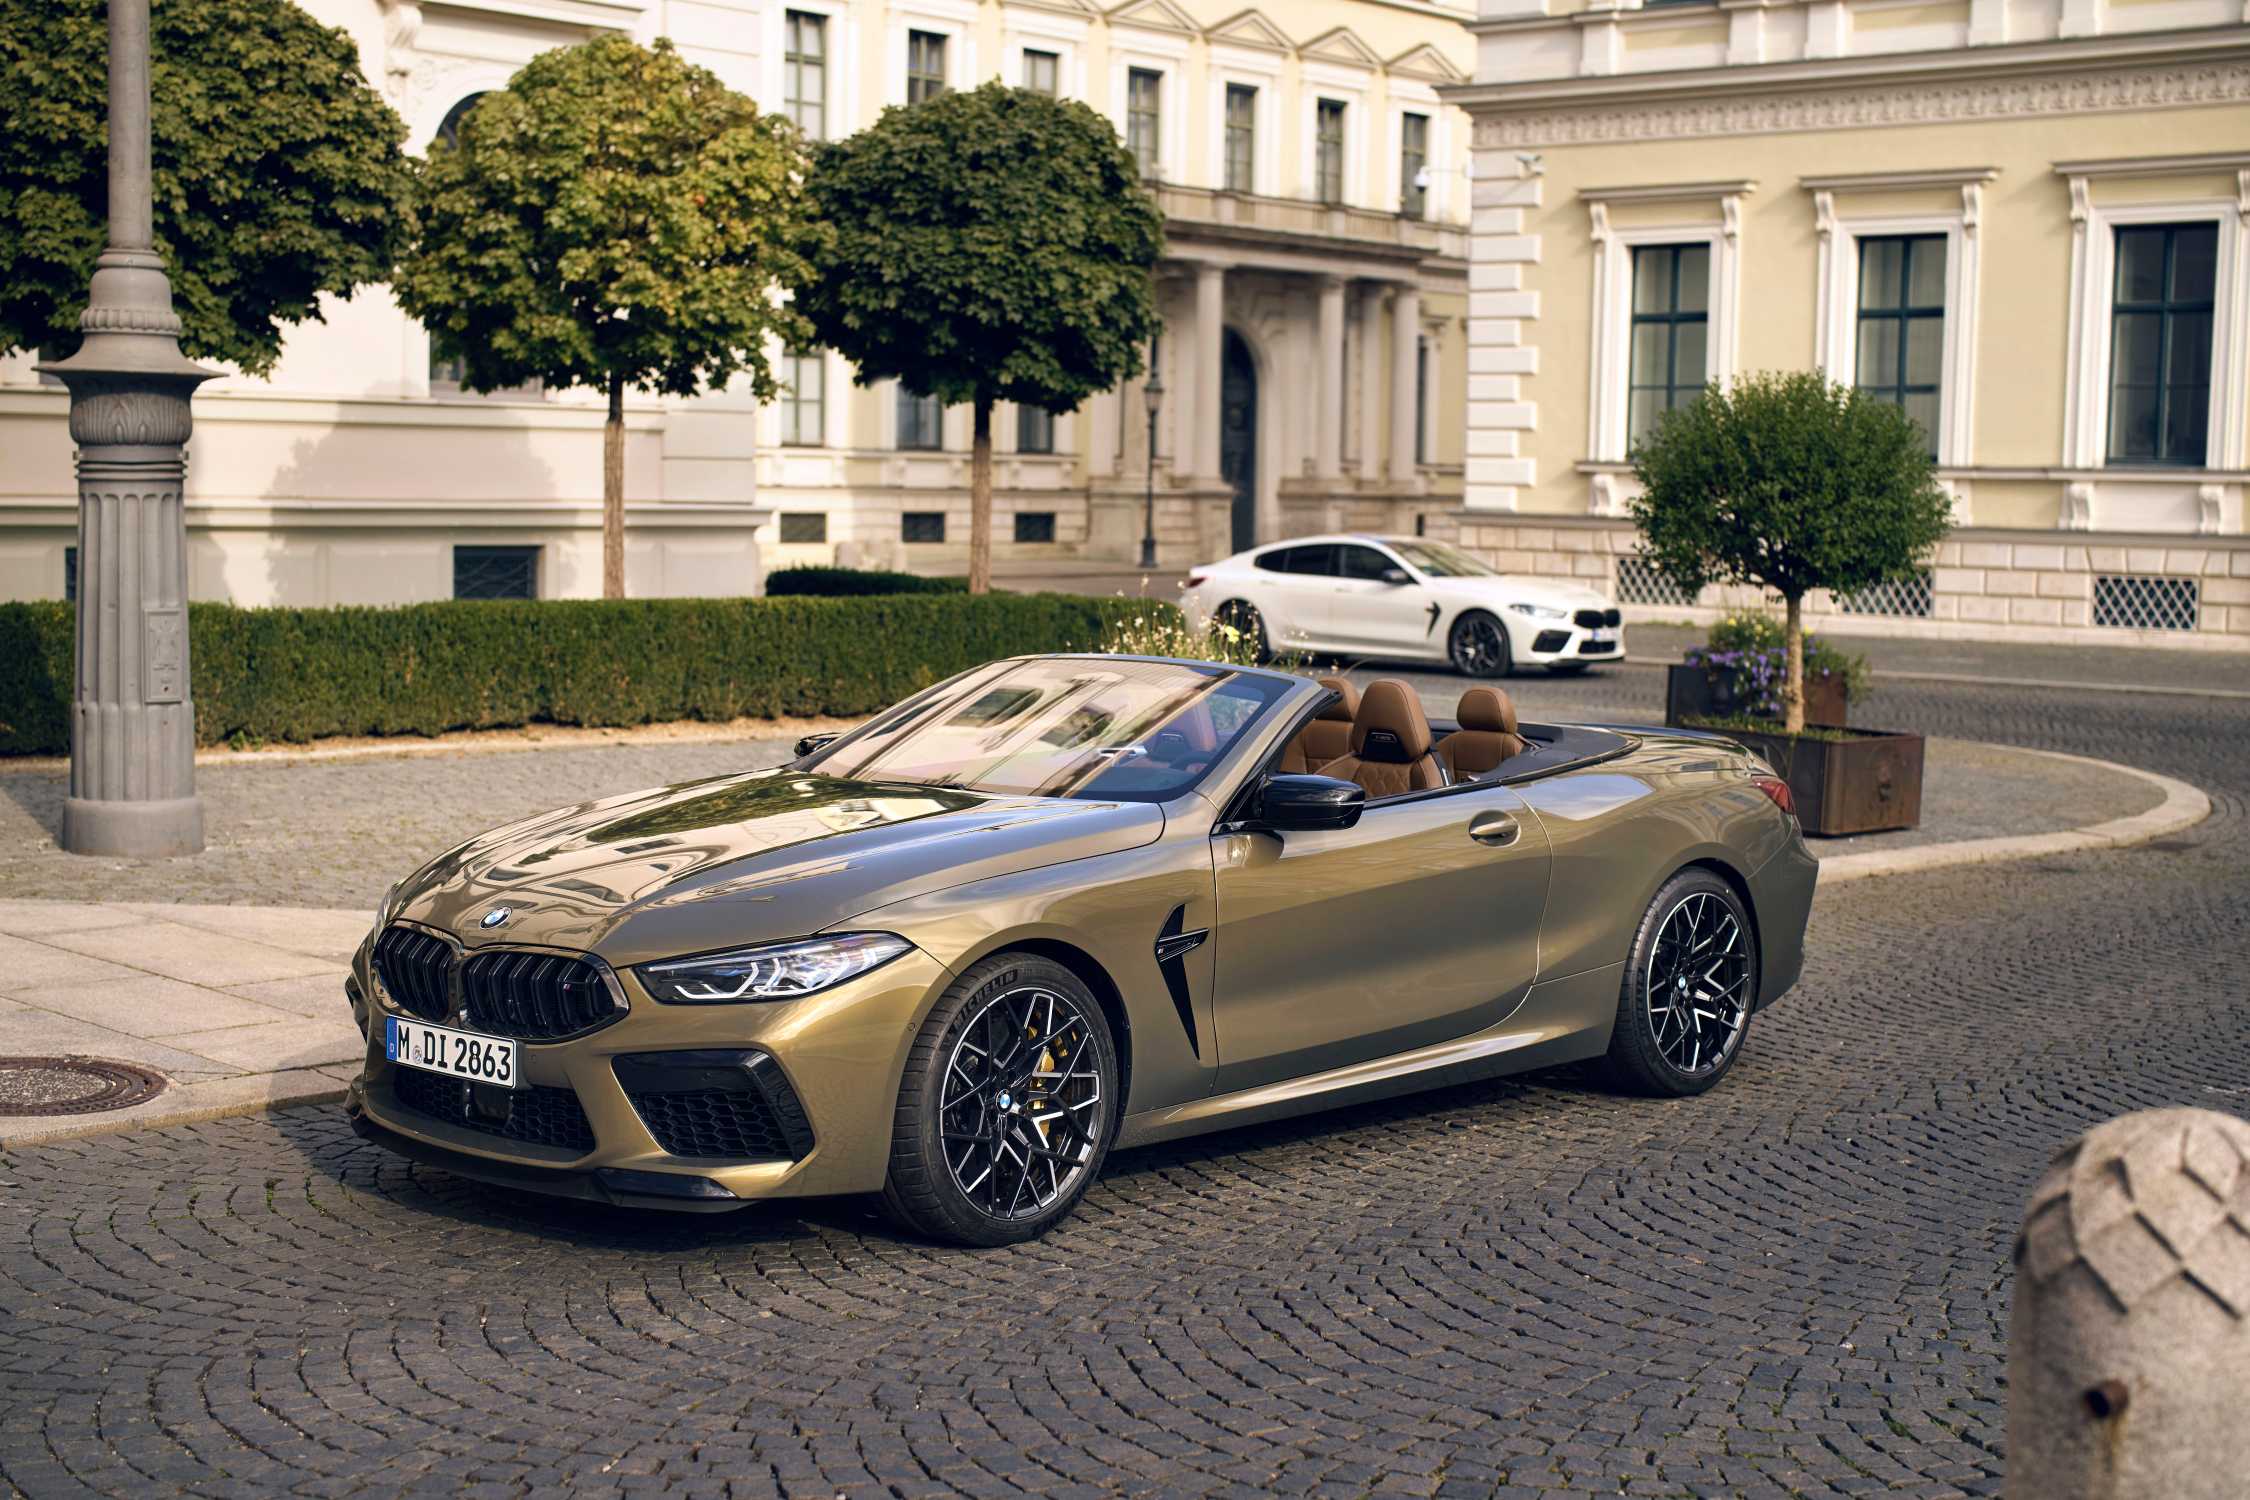 The new BMW M8 Competition Coupé, the new BMW M8 Competition Convertible, the new BMW M8 Competition Gran Coupé.